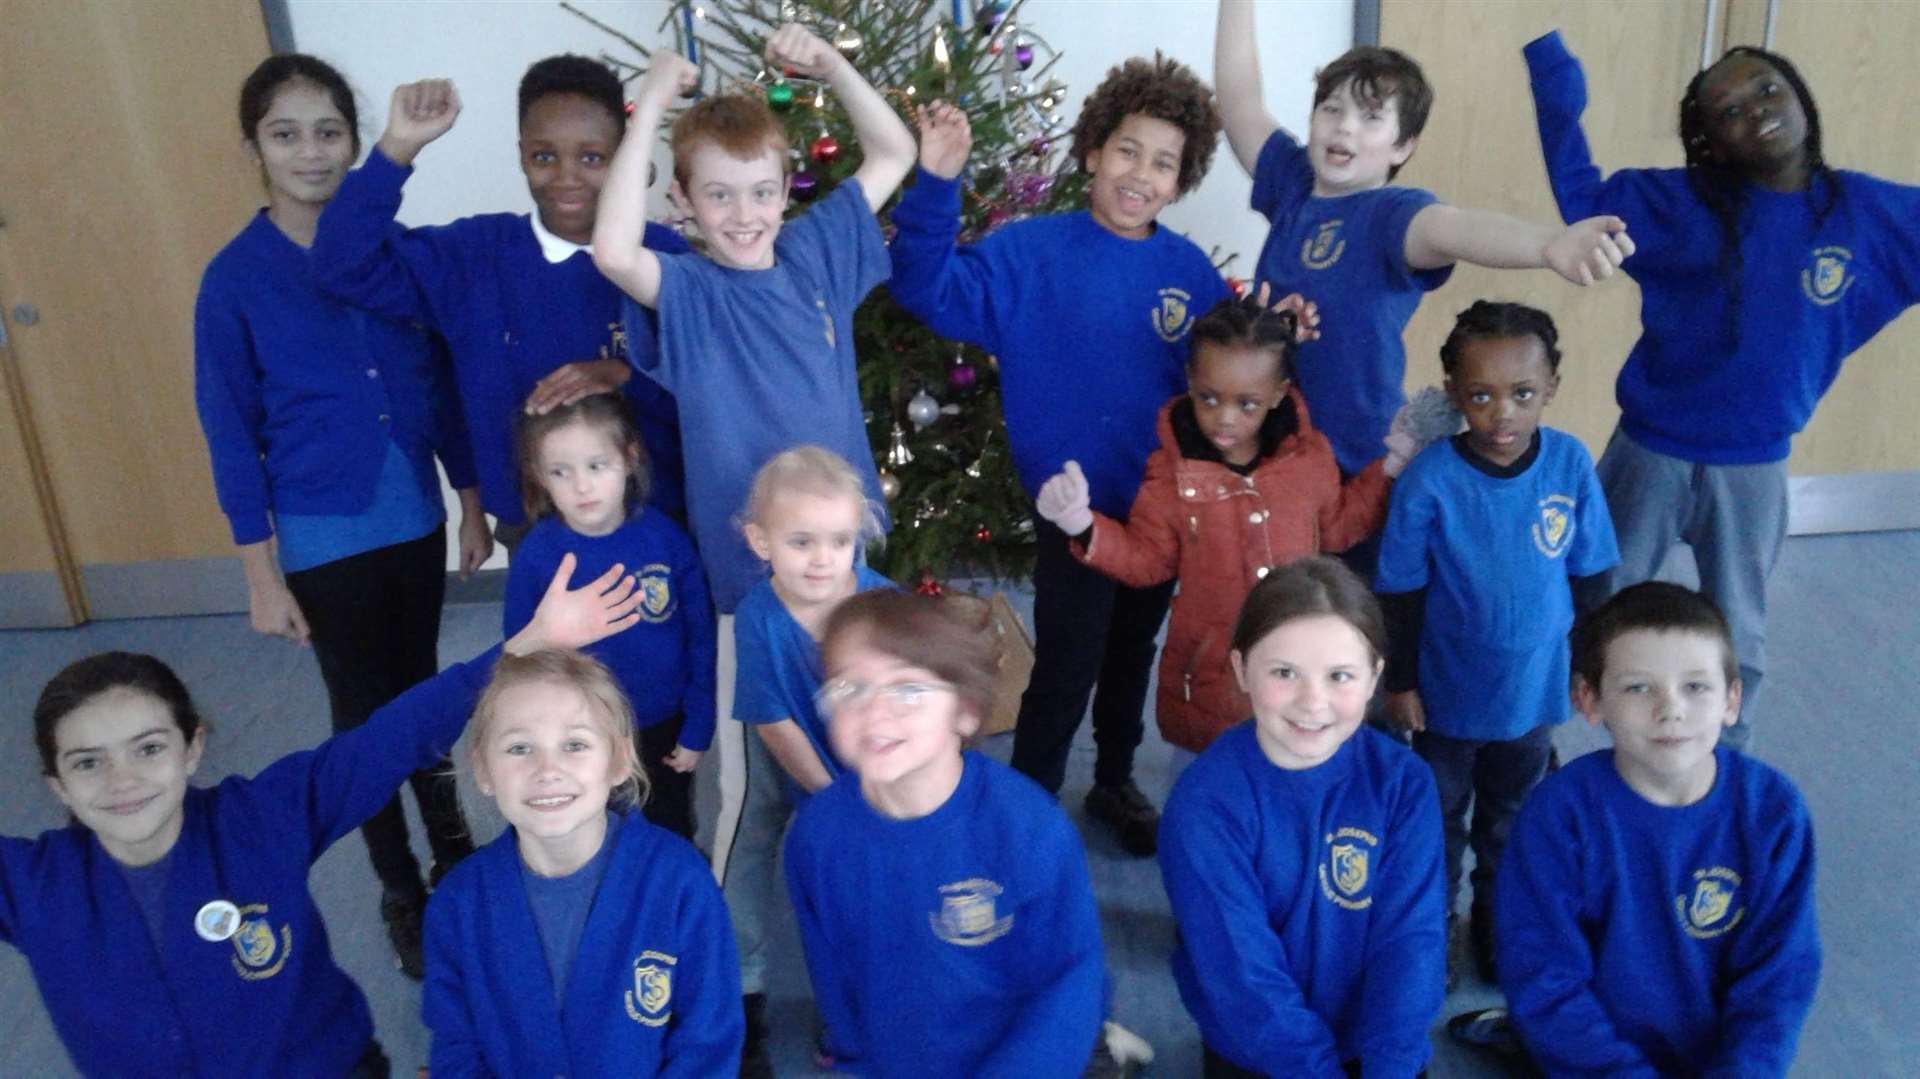 Pupils at St Joseph's Catholic Primary in Aylesham near Canterbury rejoice at the news that their trip to the Marlowe theatre was saved. Photo: St Joseph's Catholic Primary